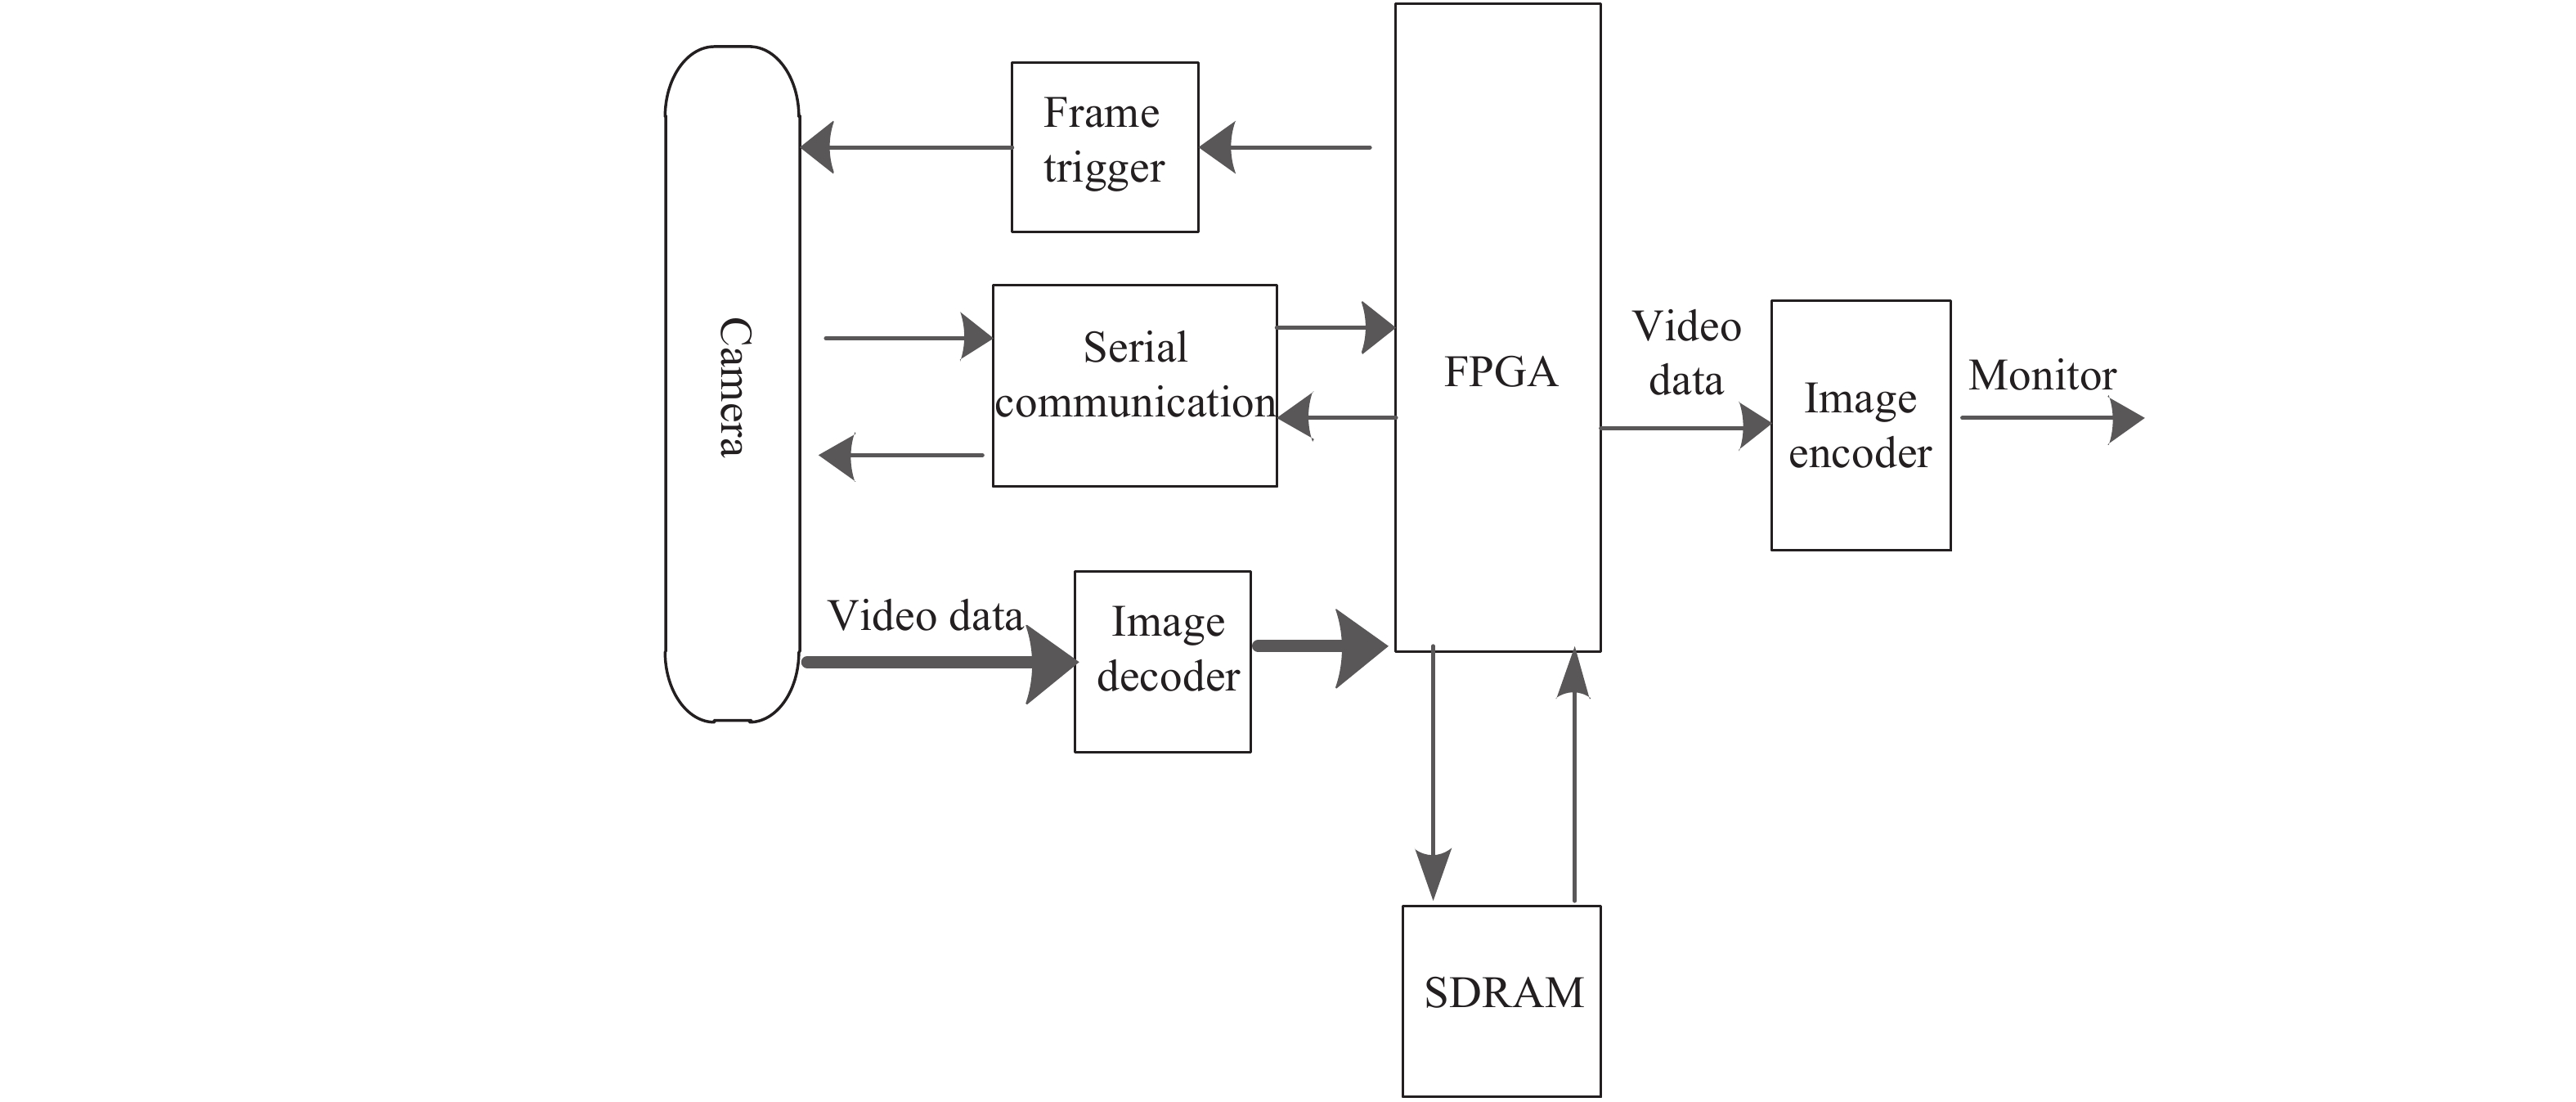 Block diagram of the system